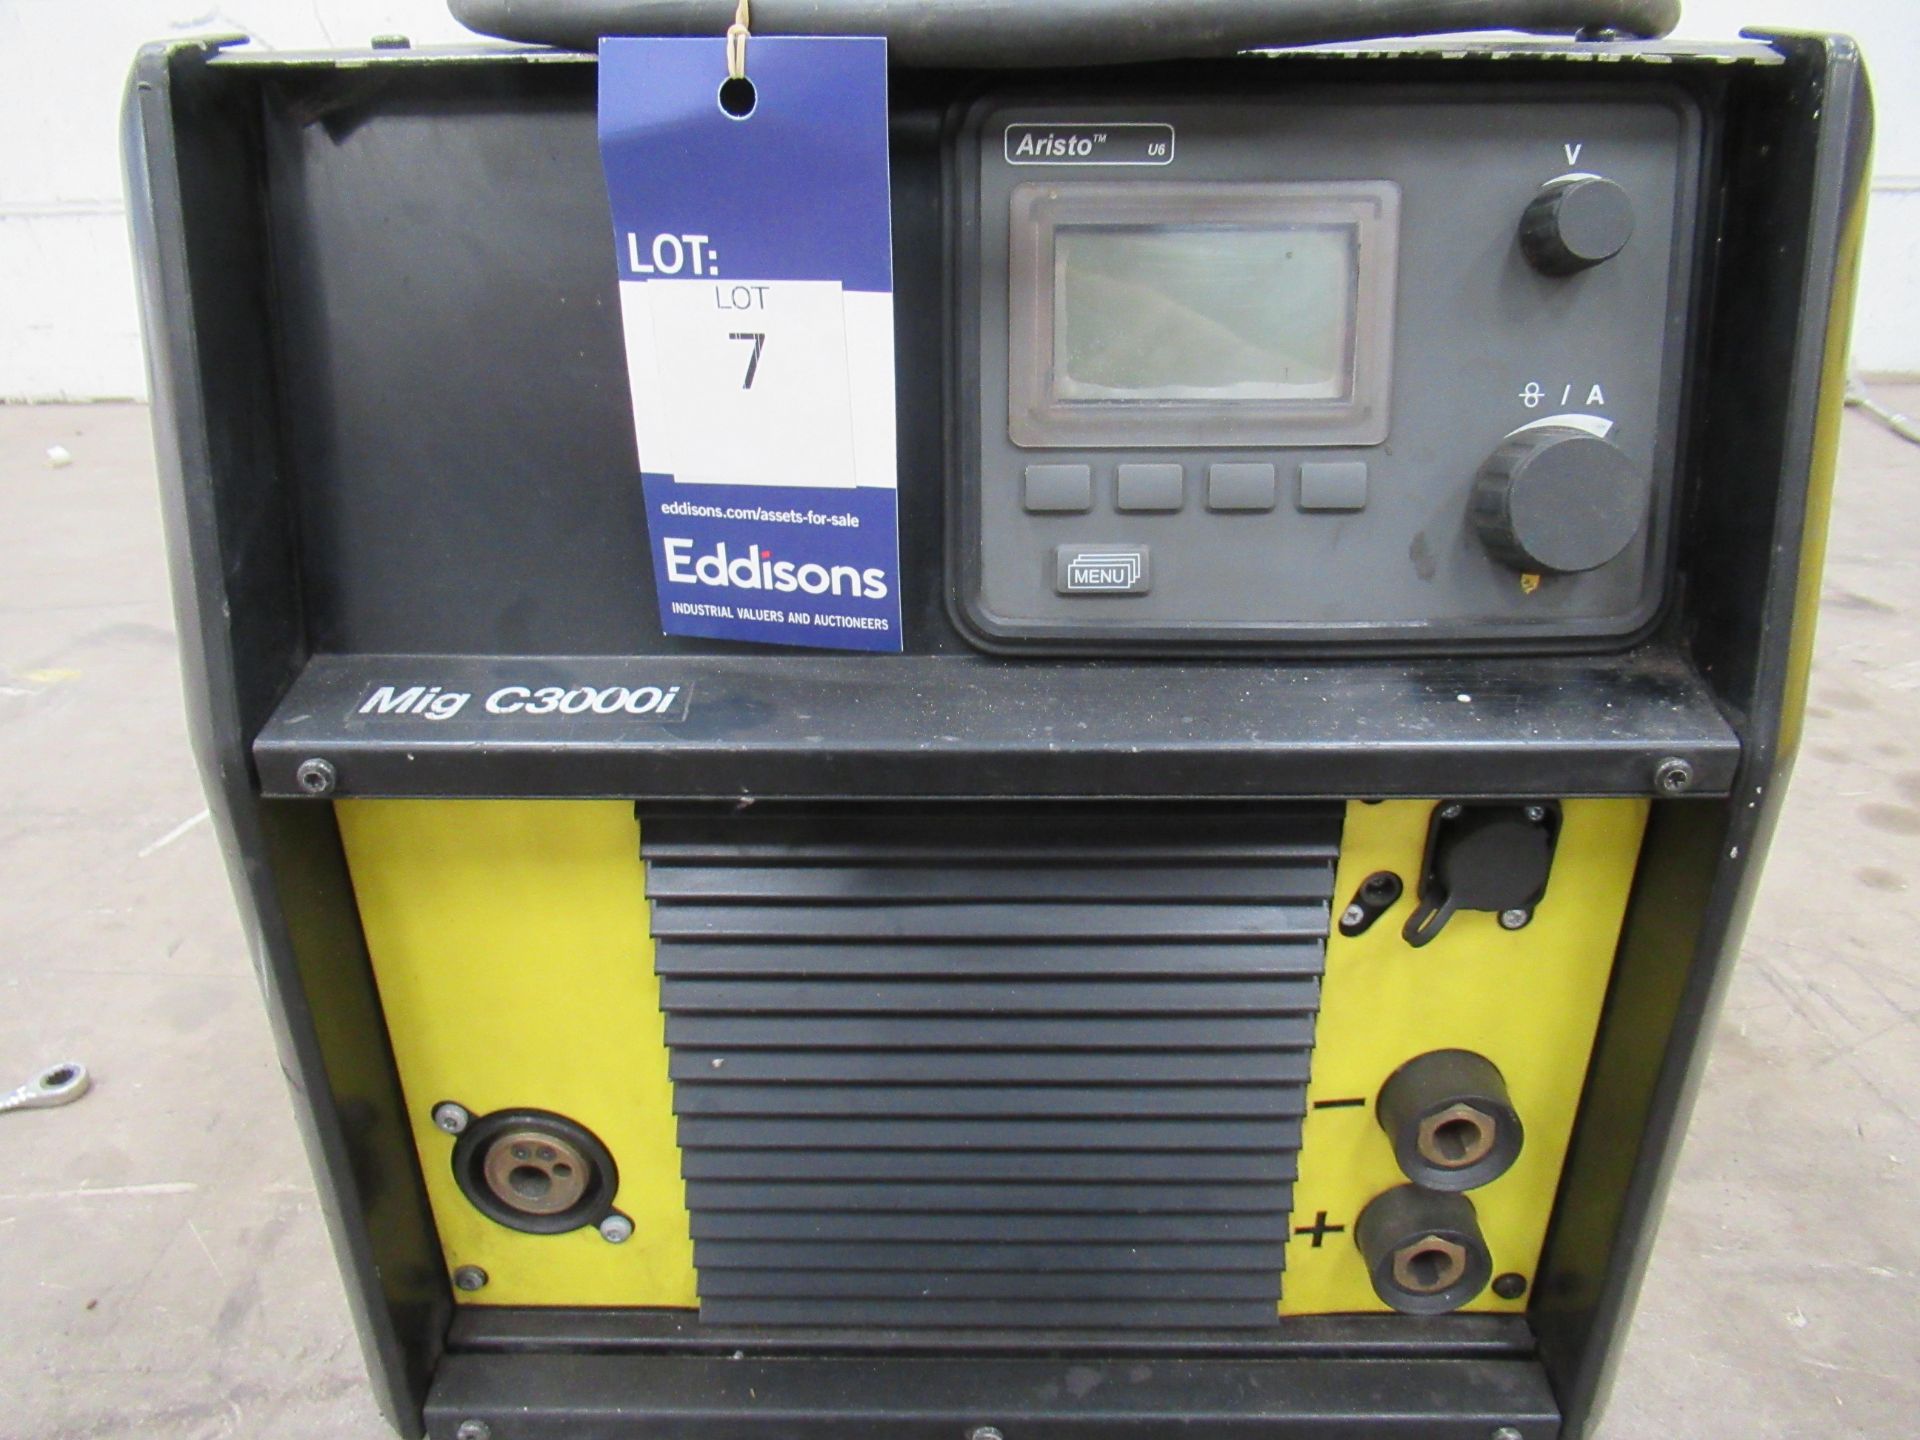 E5aB MiG C3000i Aristo MiG welder and built in wire feed